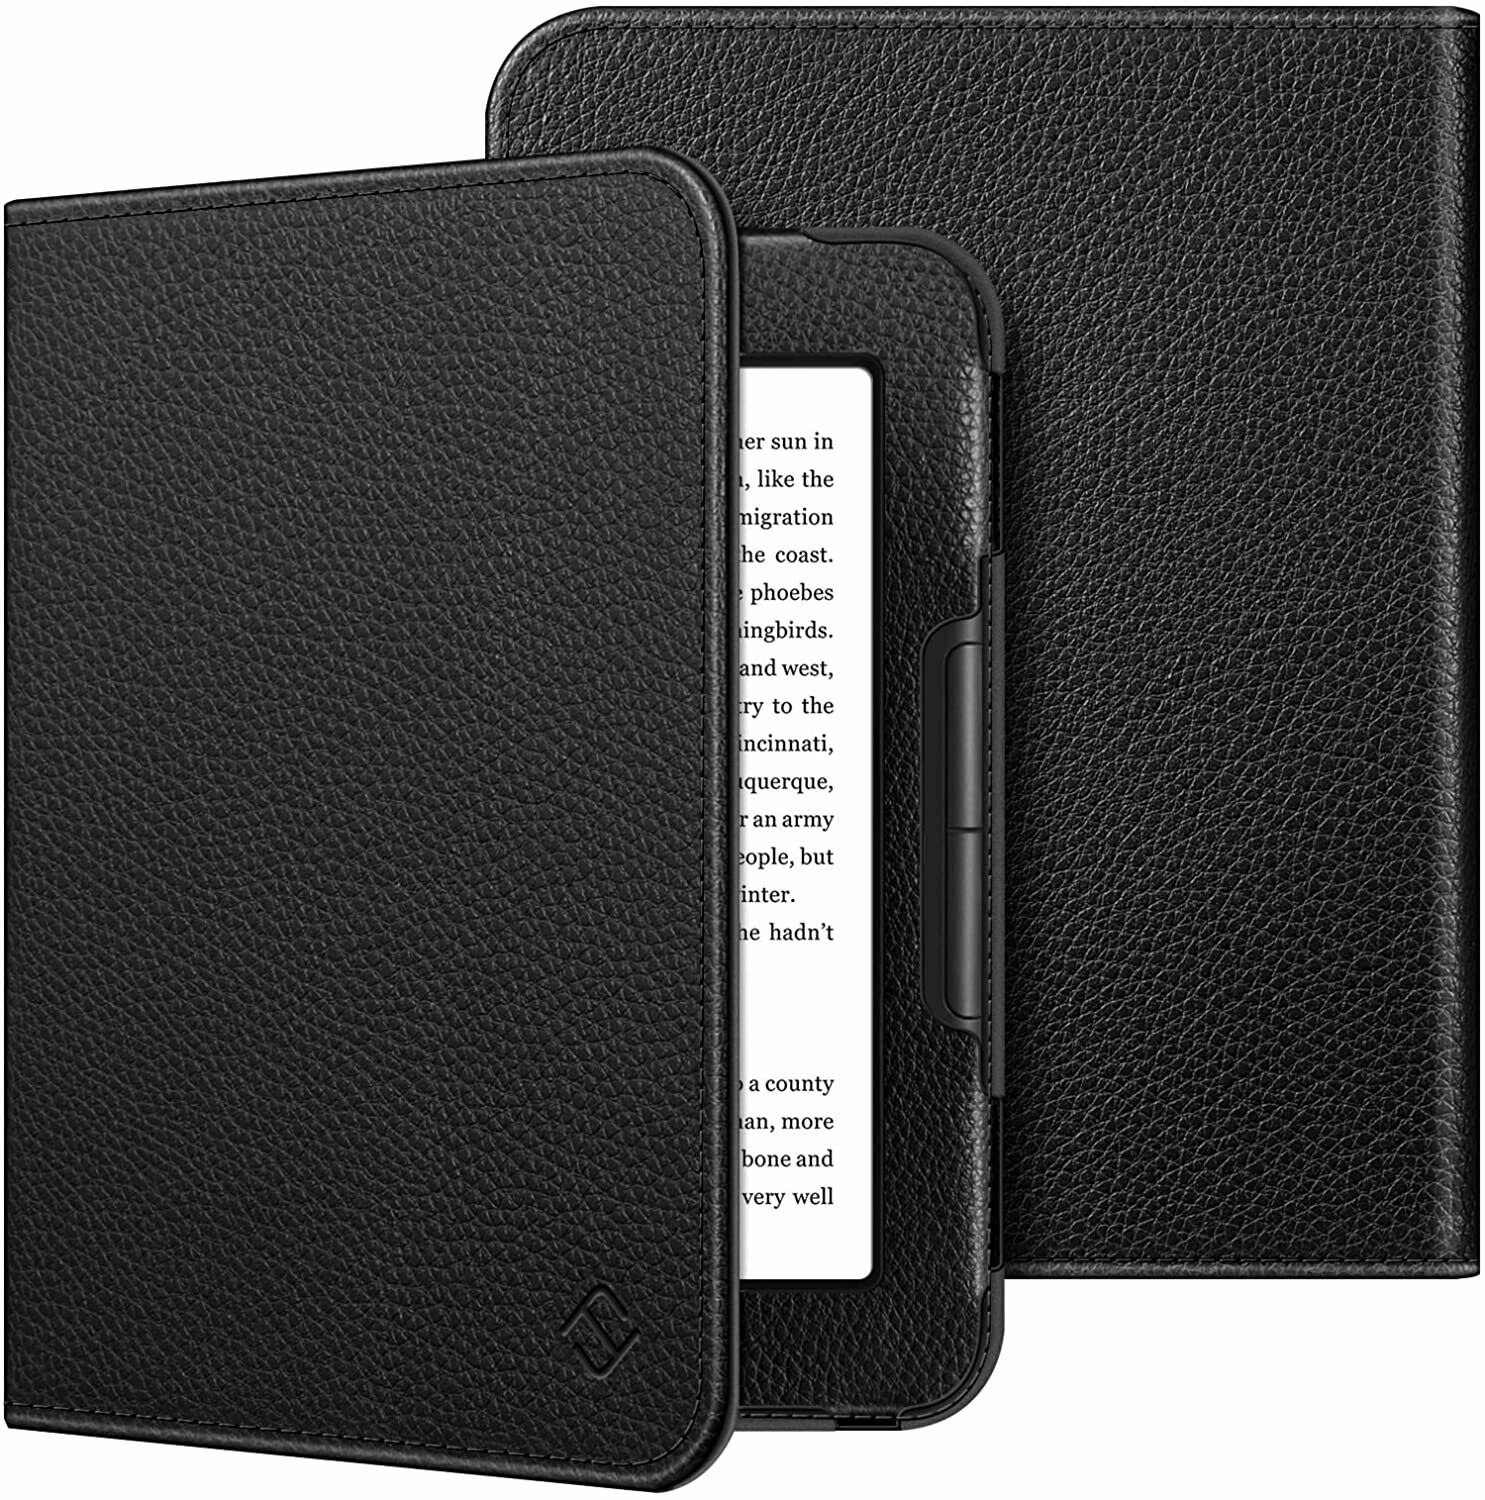 Case for Noble Nook GlowLight 4 2021 6\